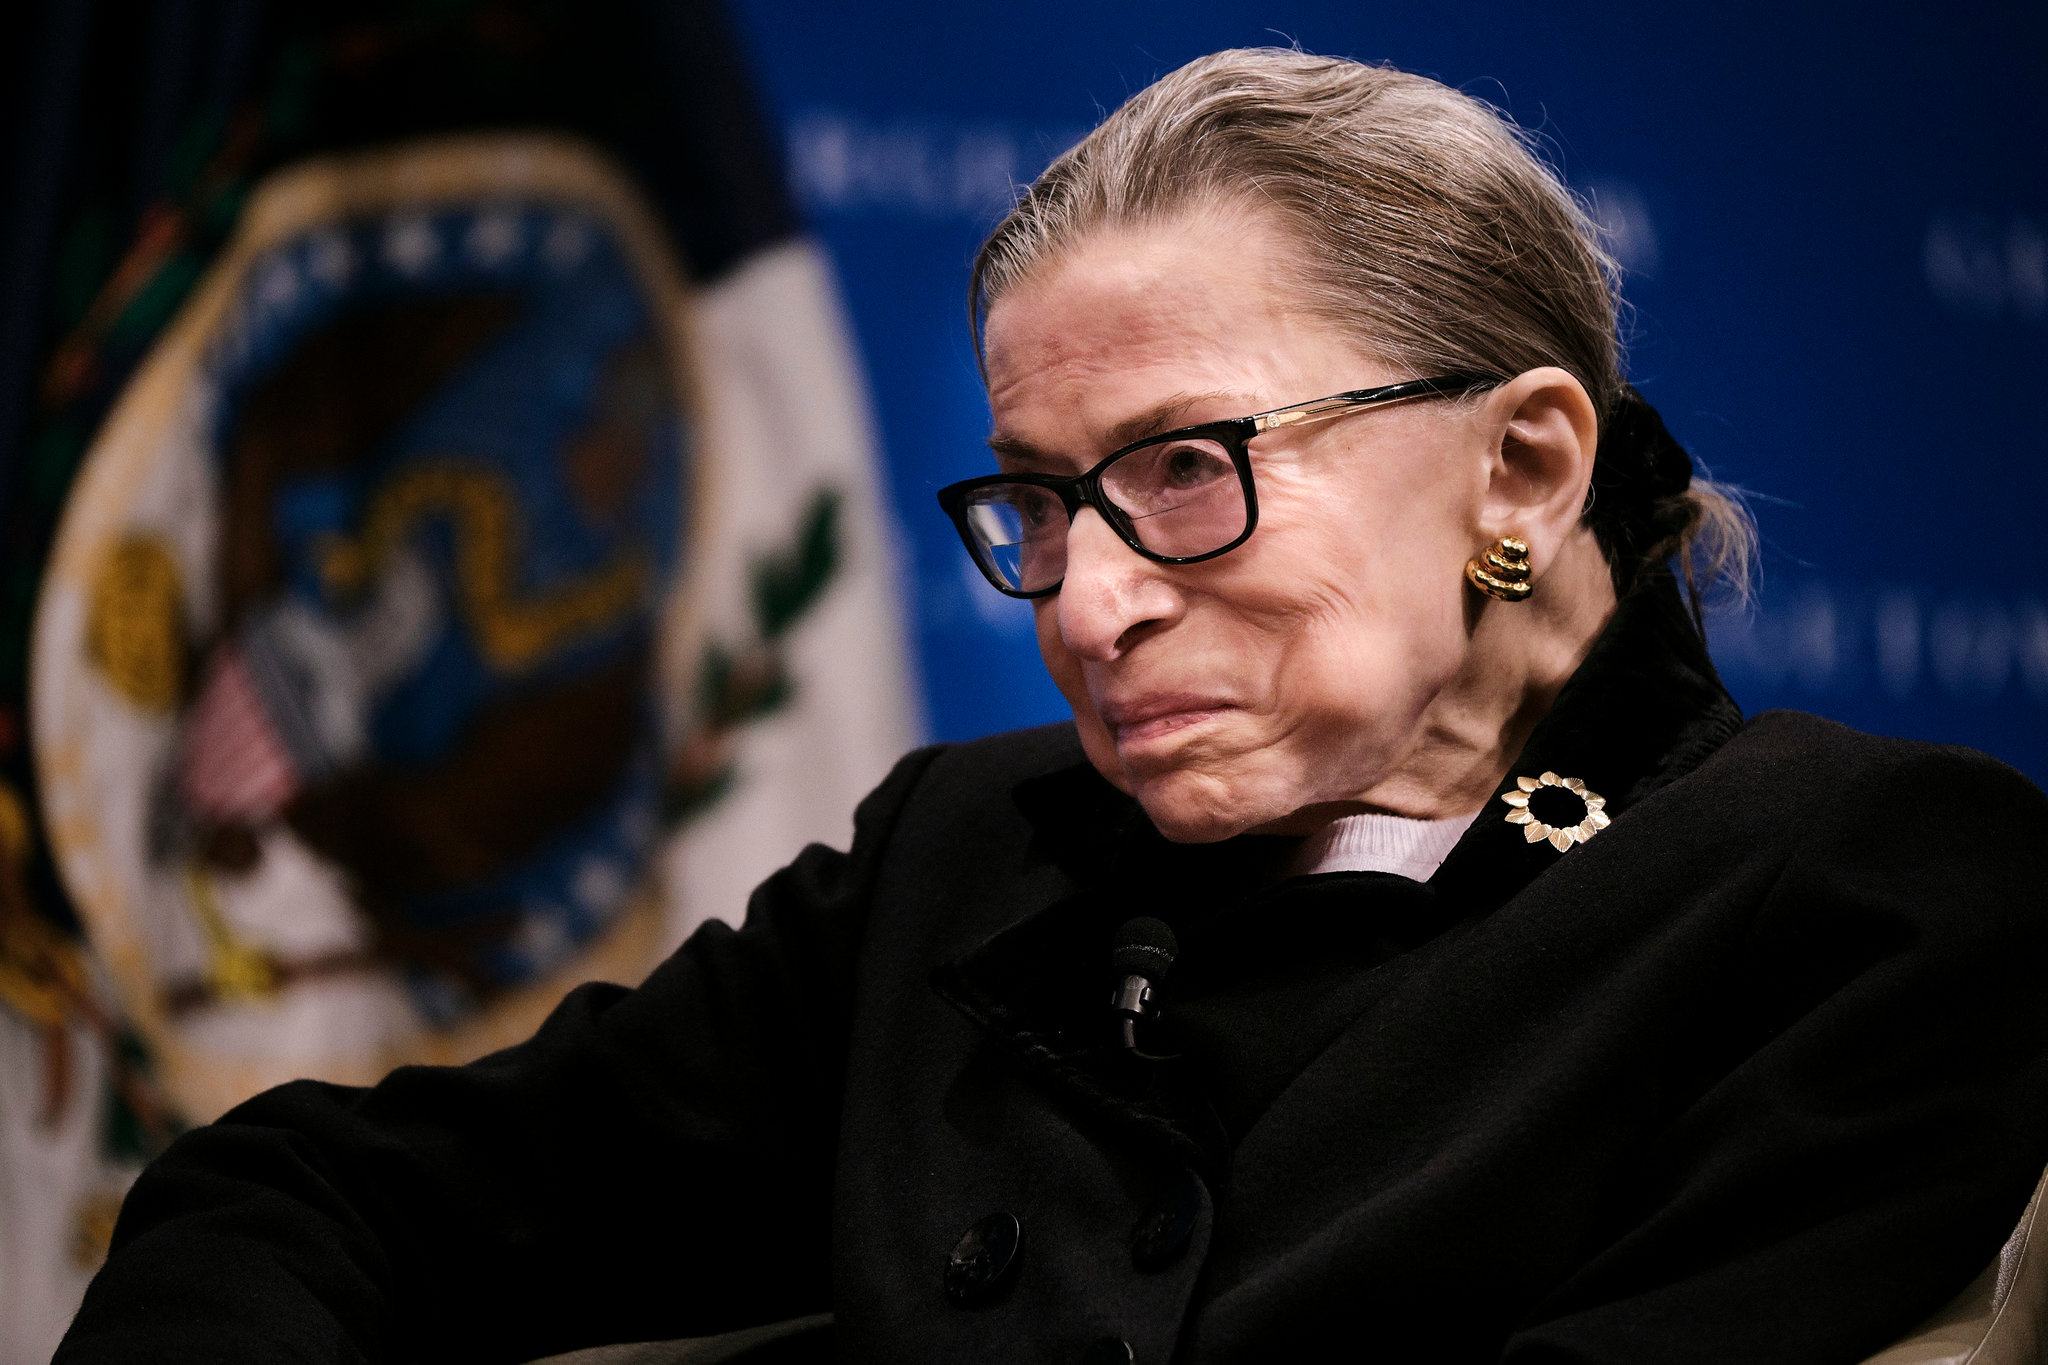 Frontlist | New book will include final thoughts from Justice Ruth Bader Ginsburg